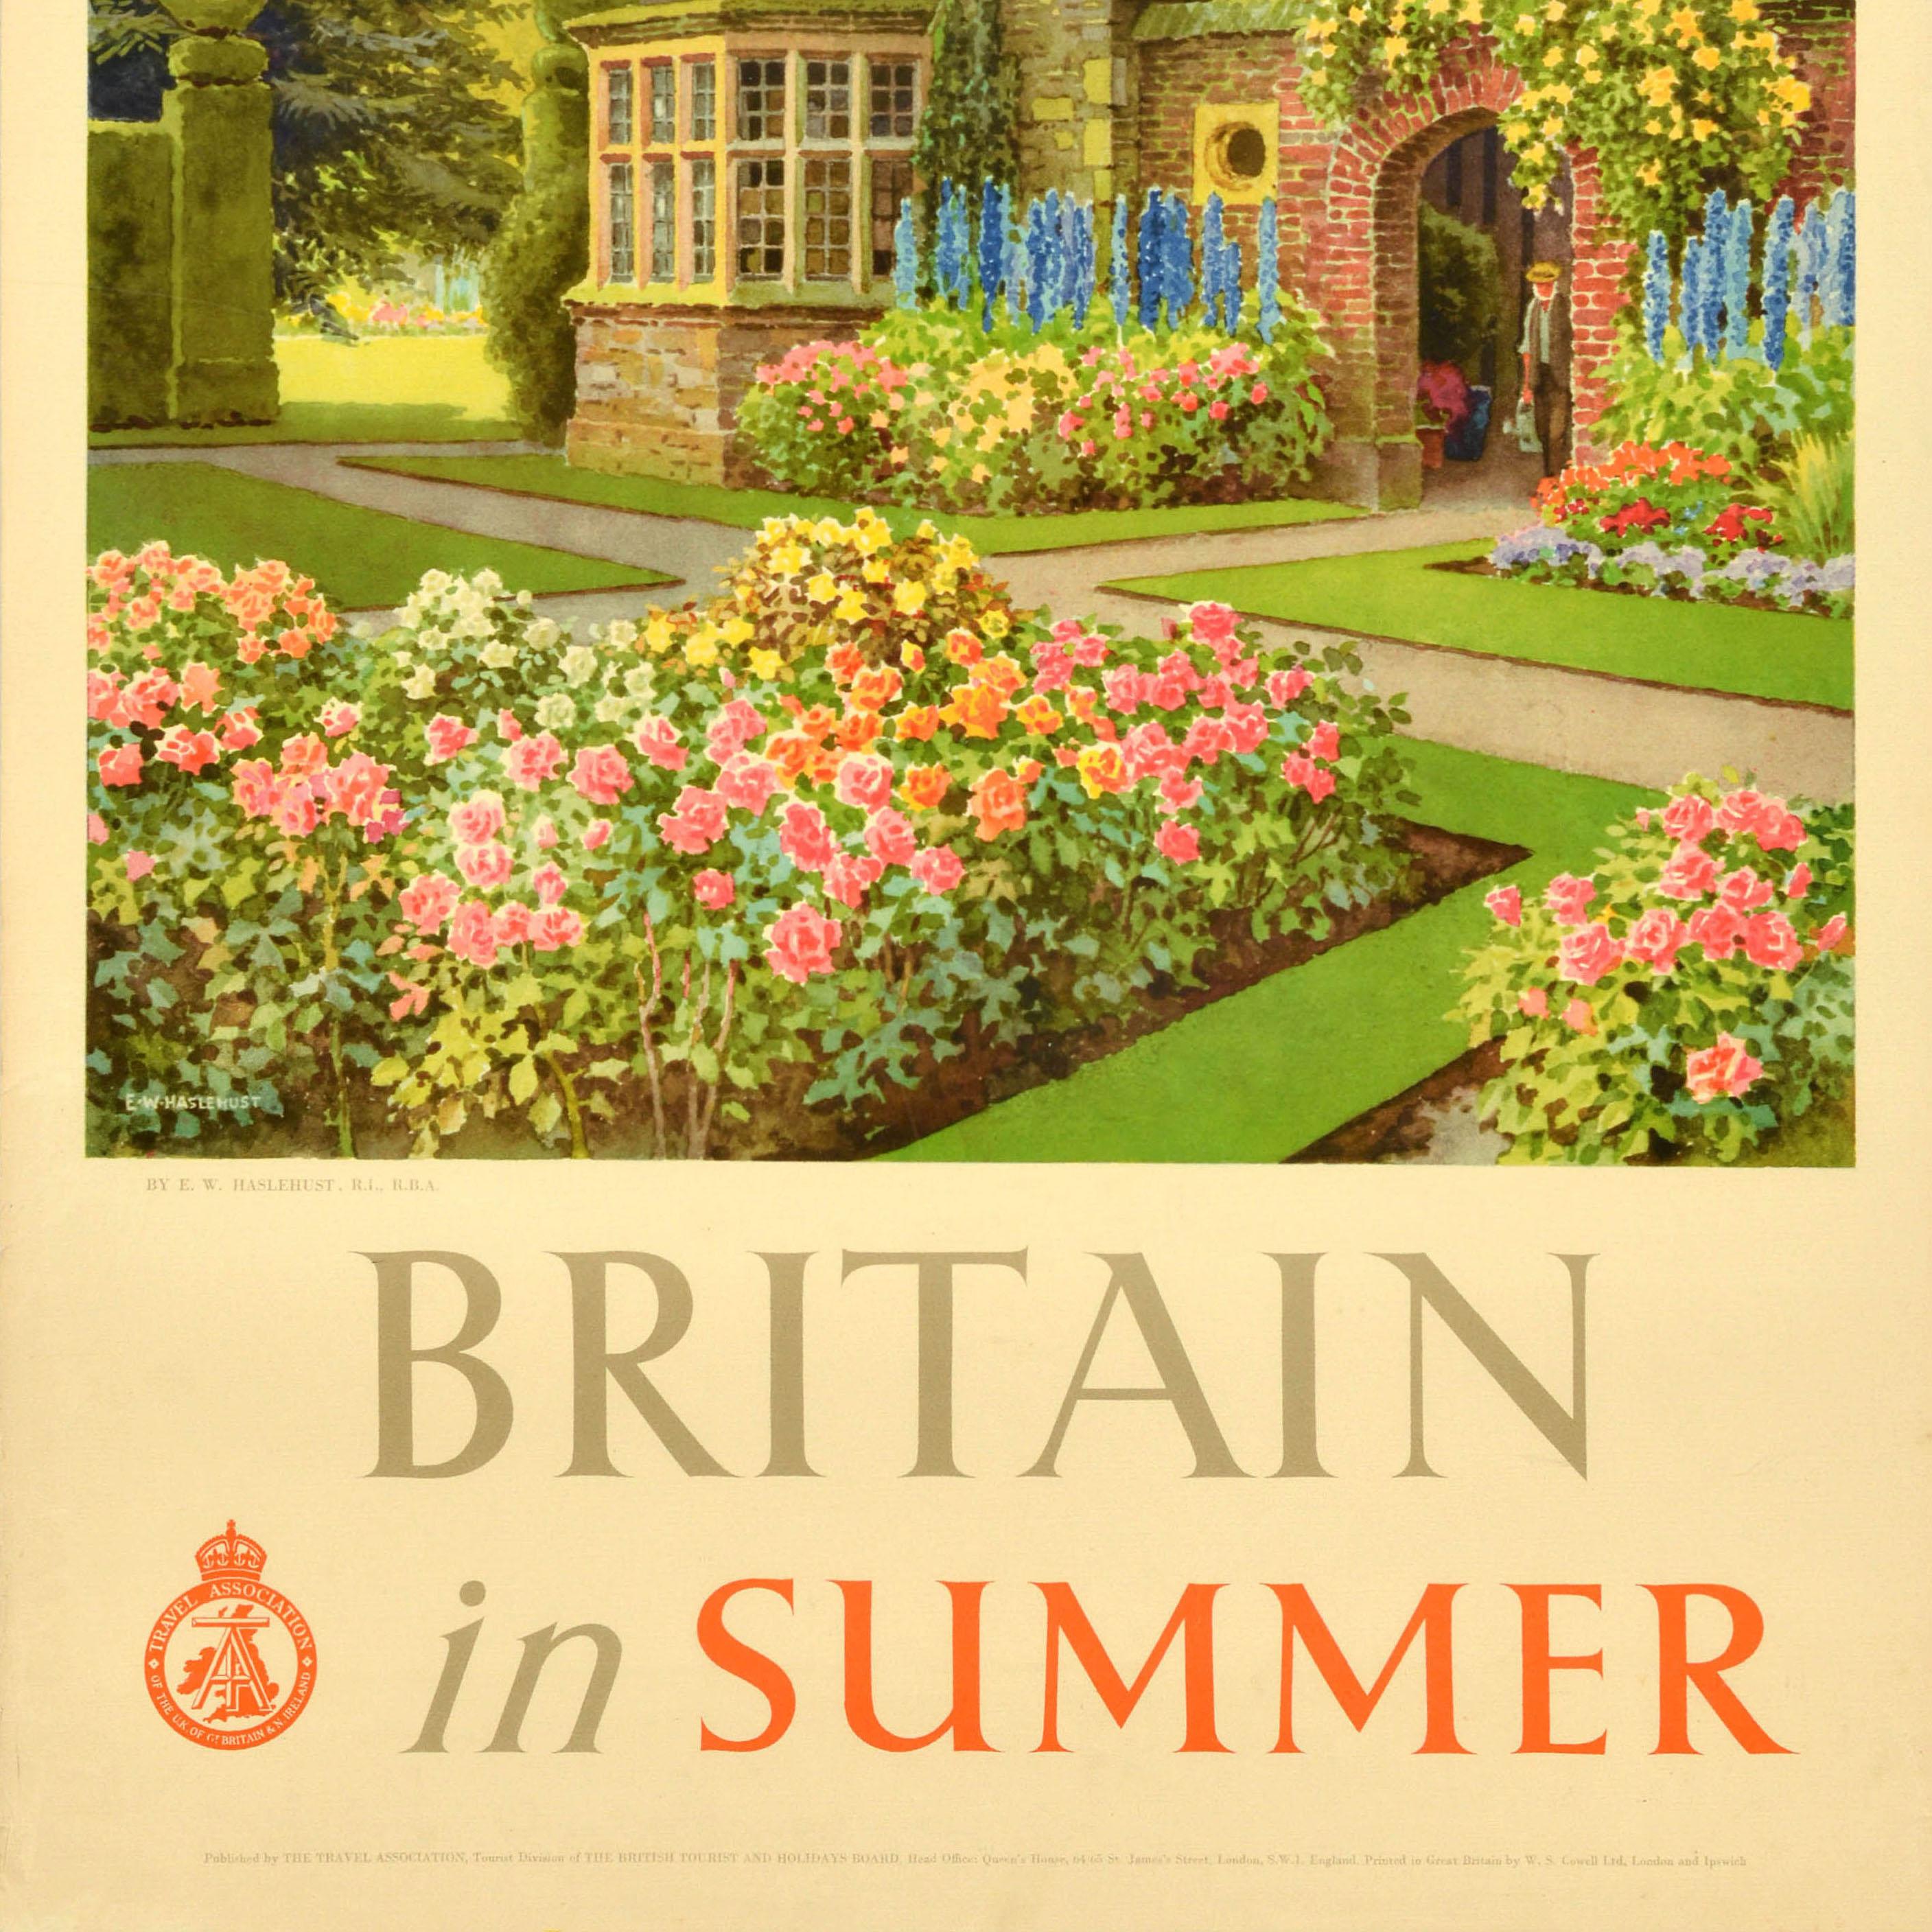 Original vintage travel poster - Britain in Summer - featuring a great image by the watercolour painter Ernest William Haslehust (1866-1949) of a traditional English country manor house with colourful flower beds in a neatly landscaped garden with